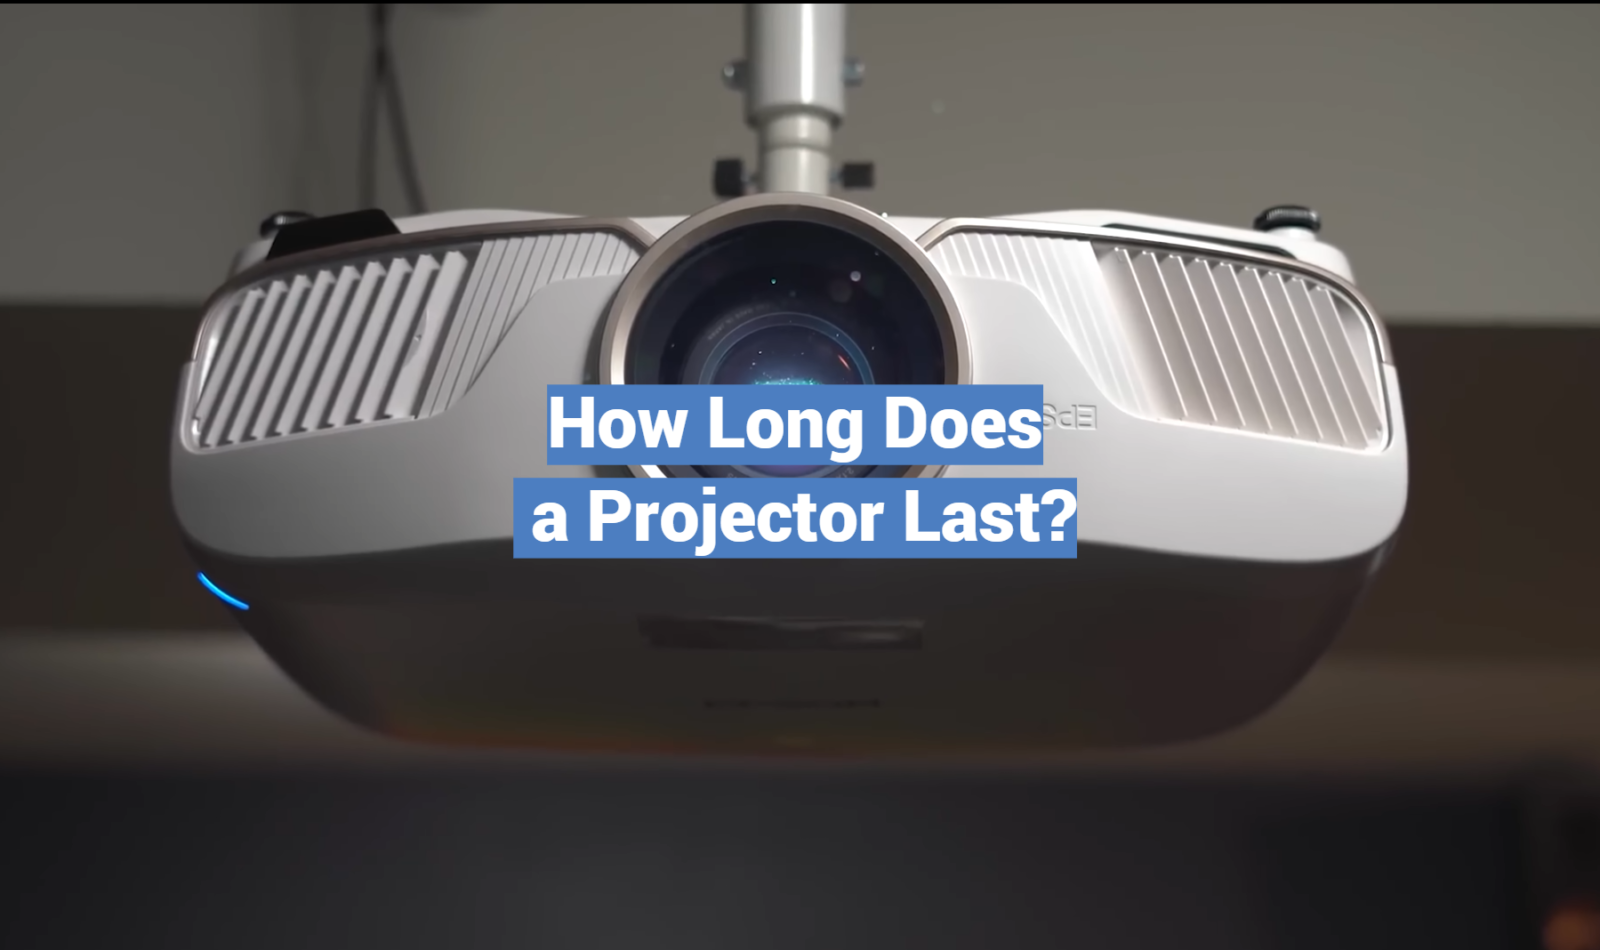 How Long Does a Projector Last?